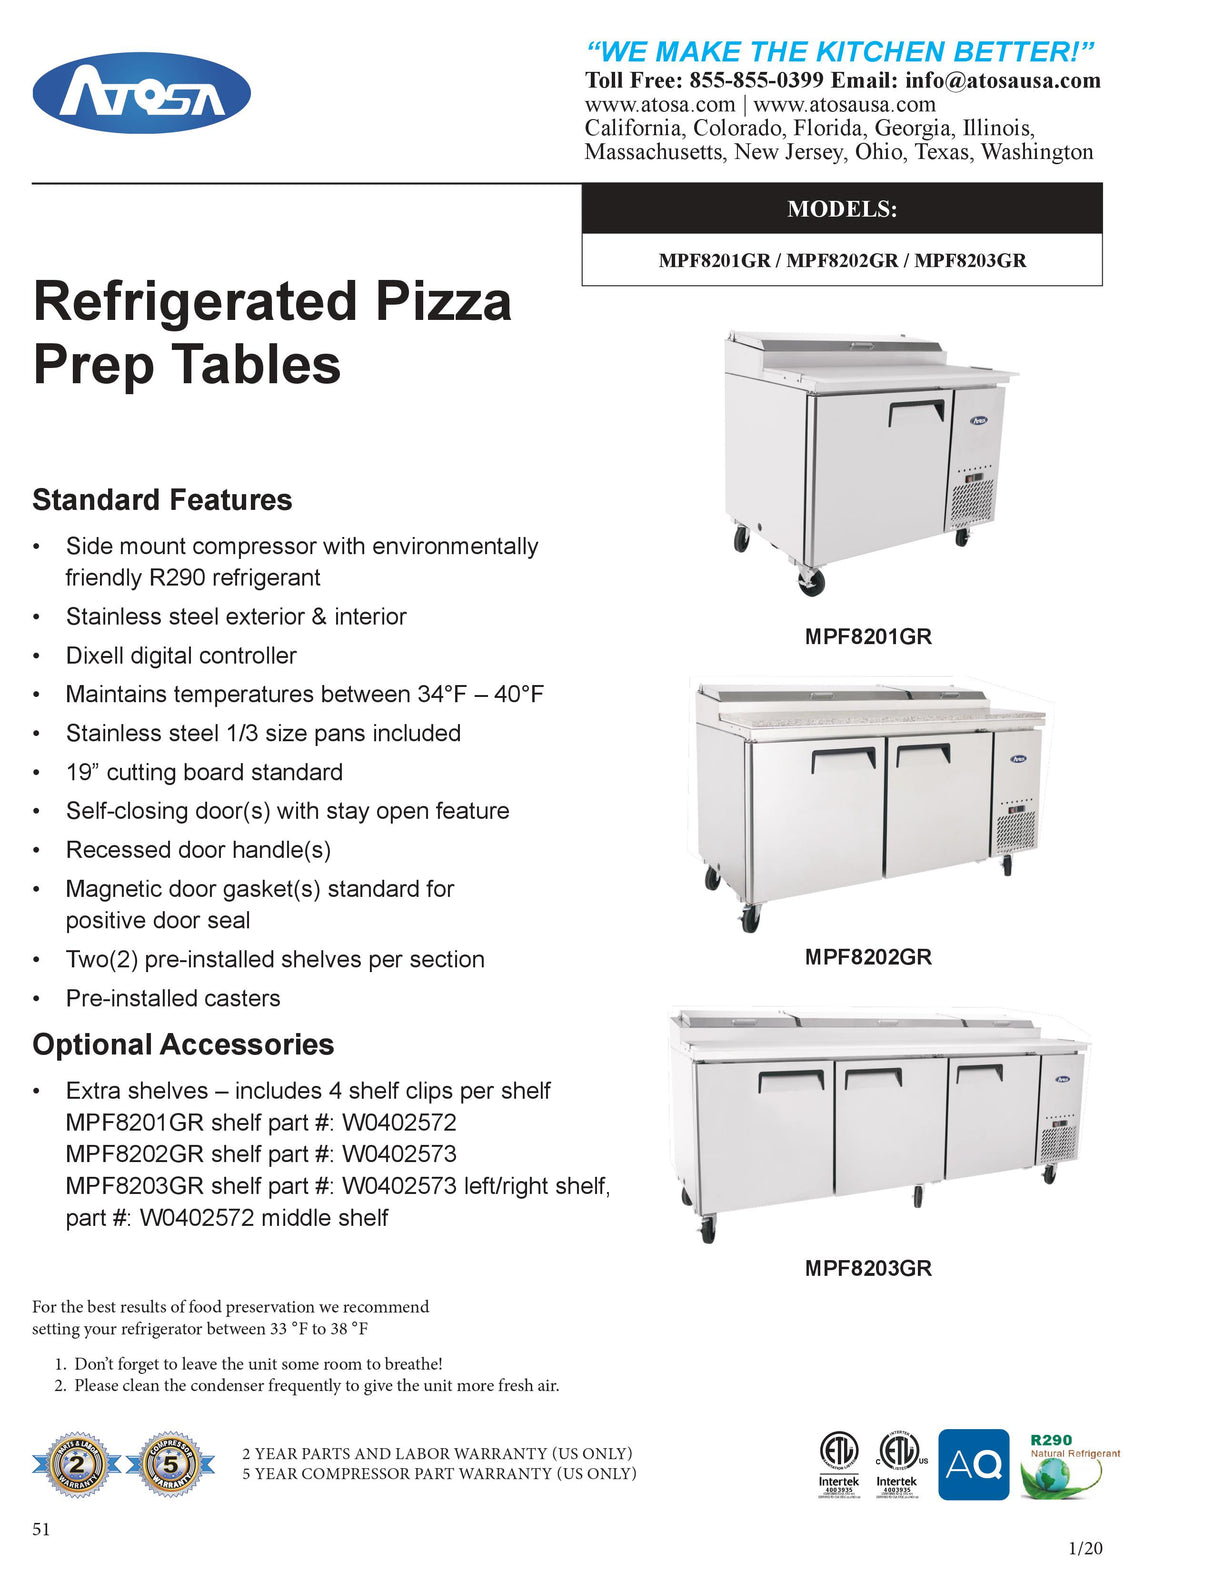 Atosa Refrigerated Counter Pizza Prep Table-MPF8201GR